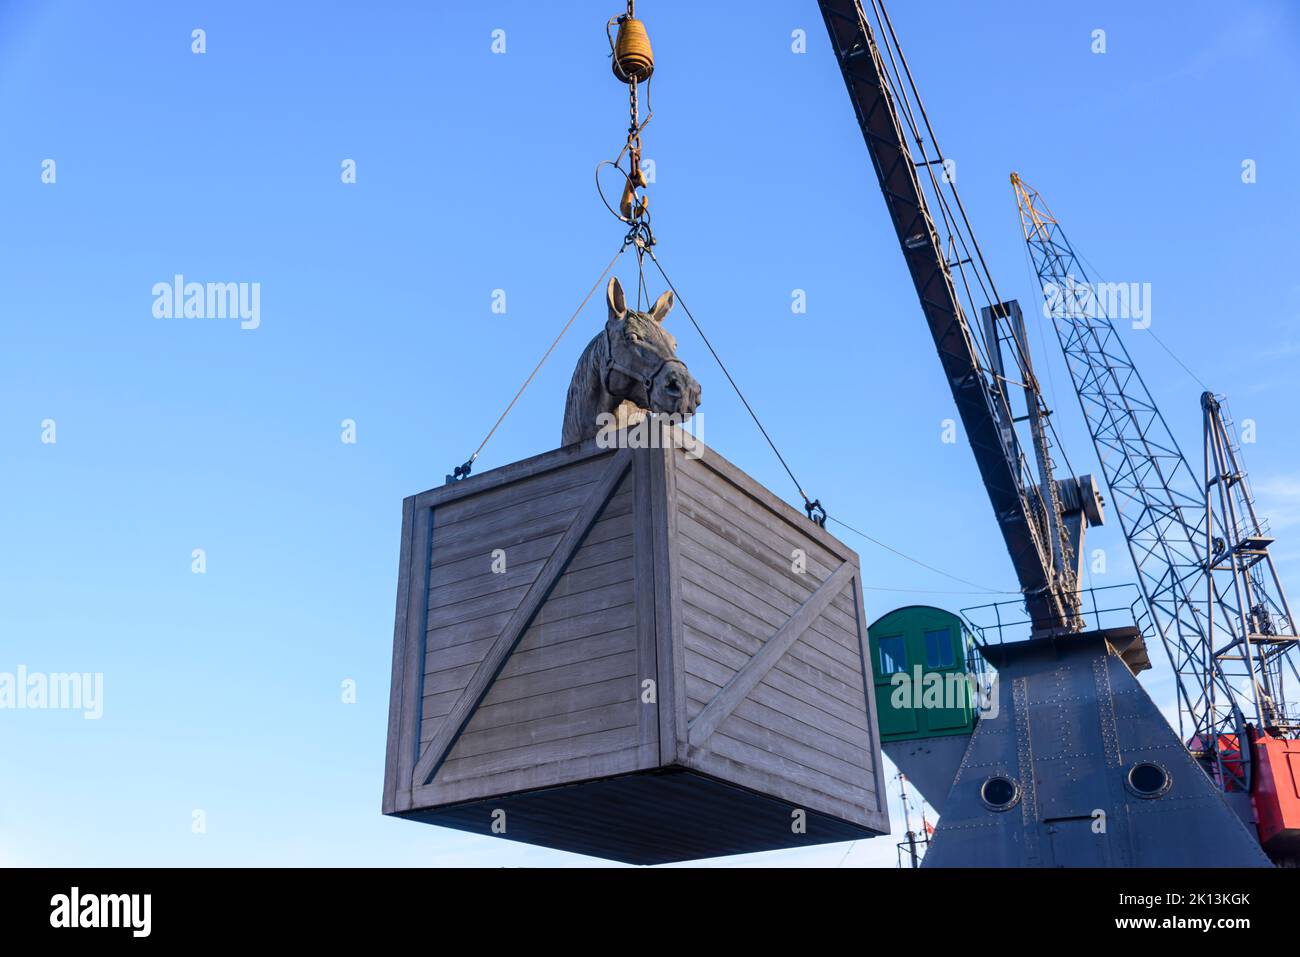 Crane holds a model of a crate containing a horse at the Port of Rotterdam, Netherlands Stock Photo